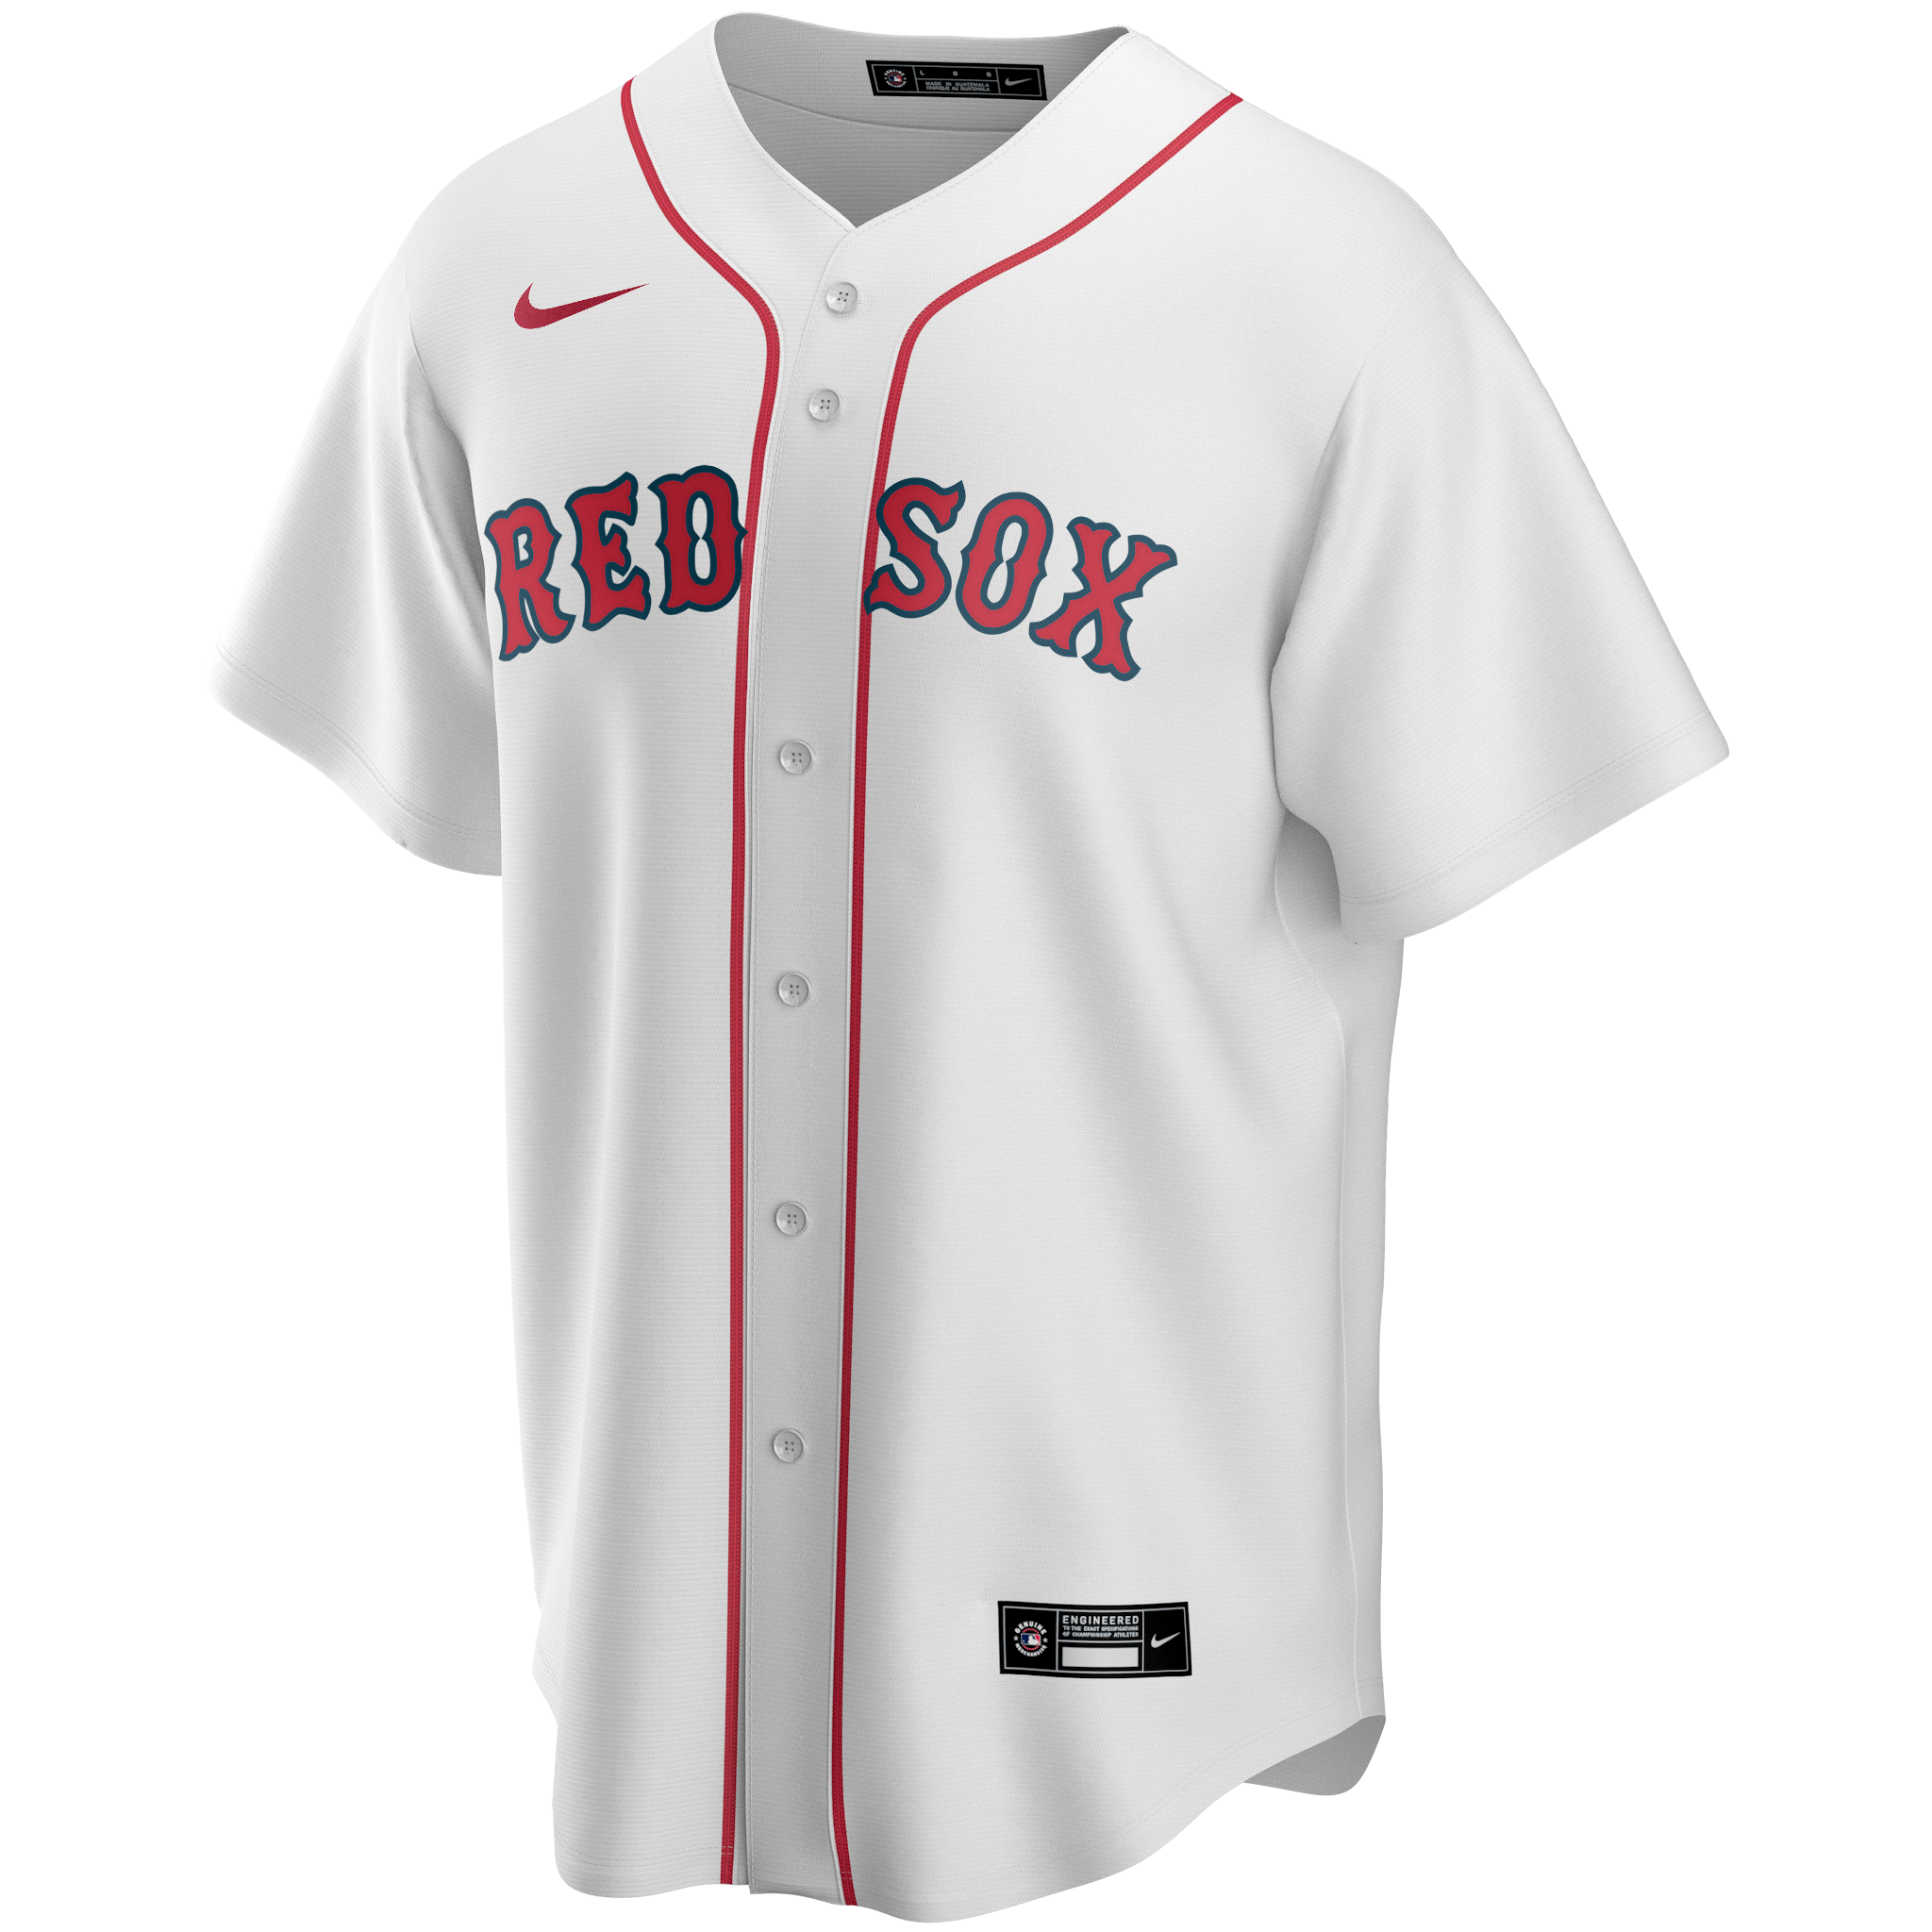 Dustin Pedroia Youth Jersey - Boston Red Sox Youth Home Jersey